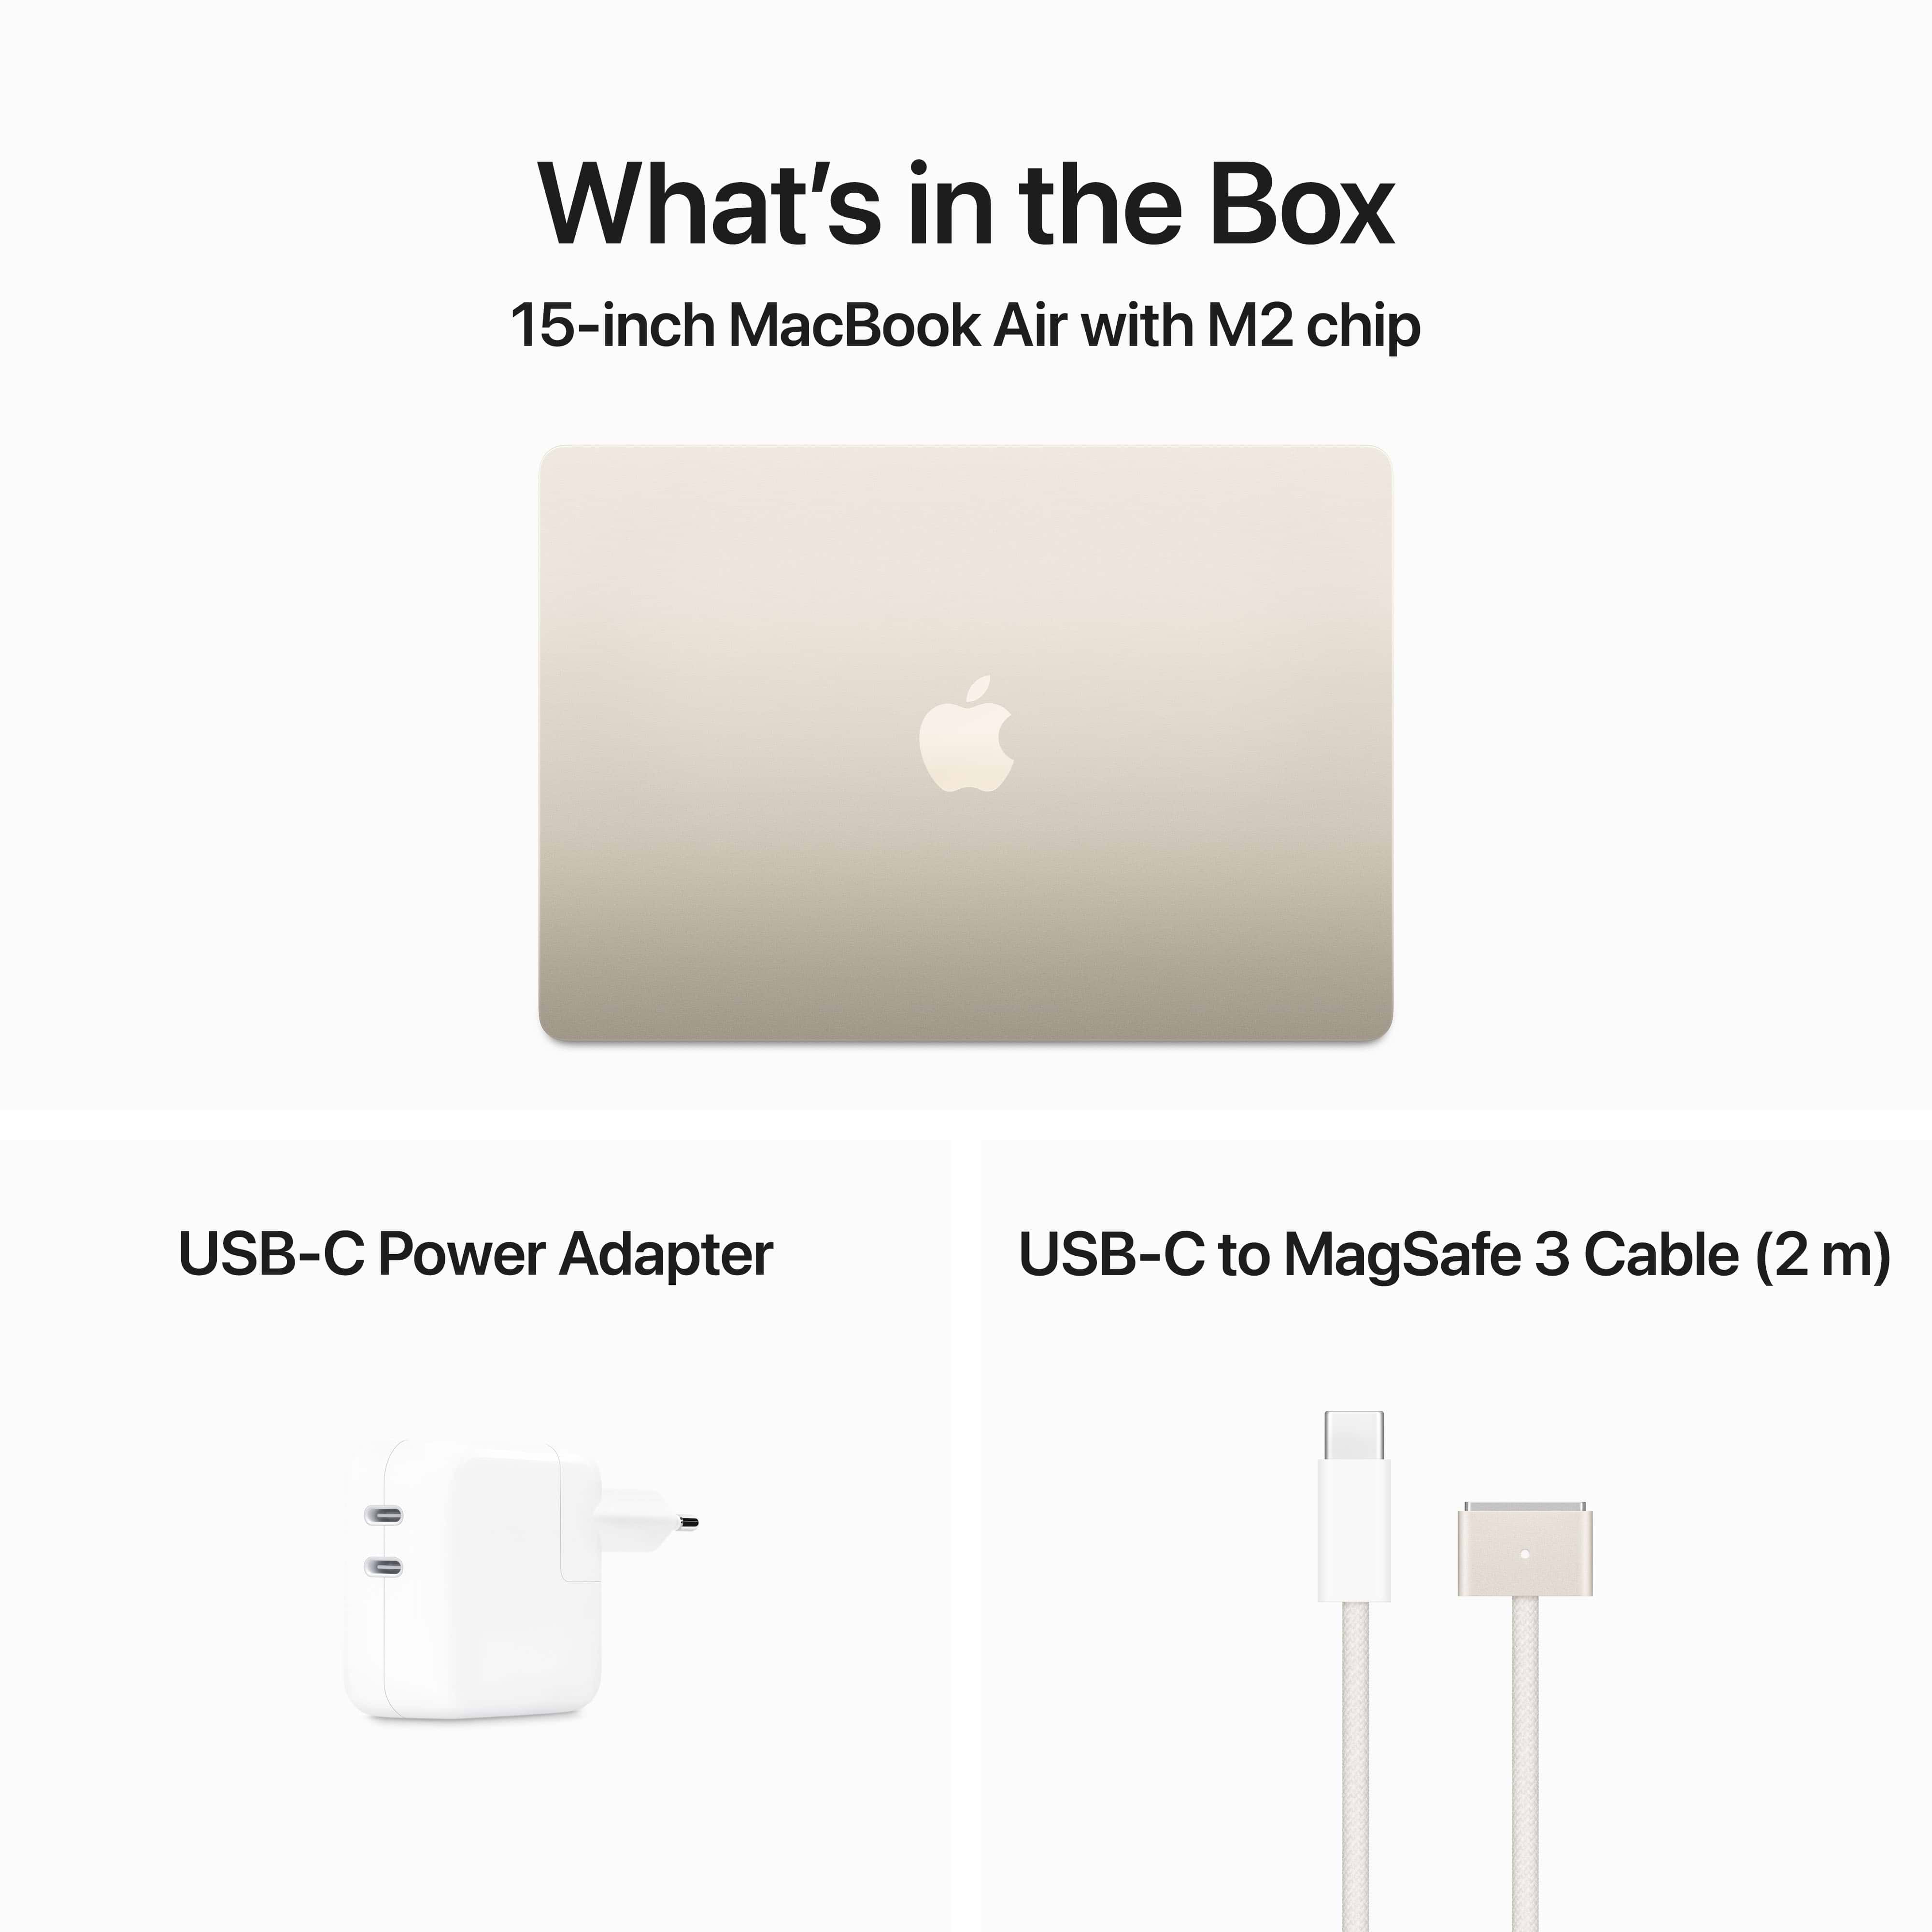 '15-inch MacBook Air: Apple M2 chip with 8-core CPU and 10-core GPU 256GB - Starlight  מחשב אייקון  נייד'